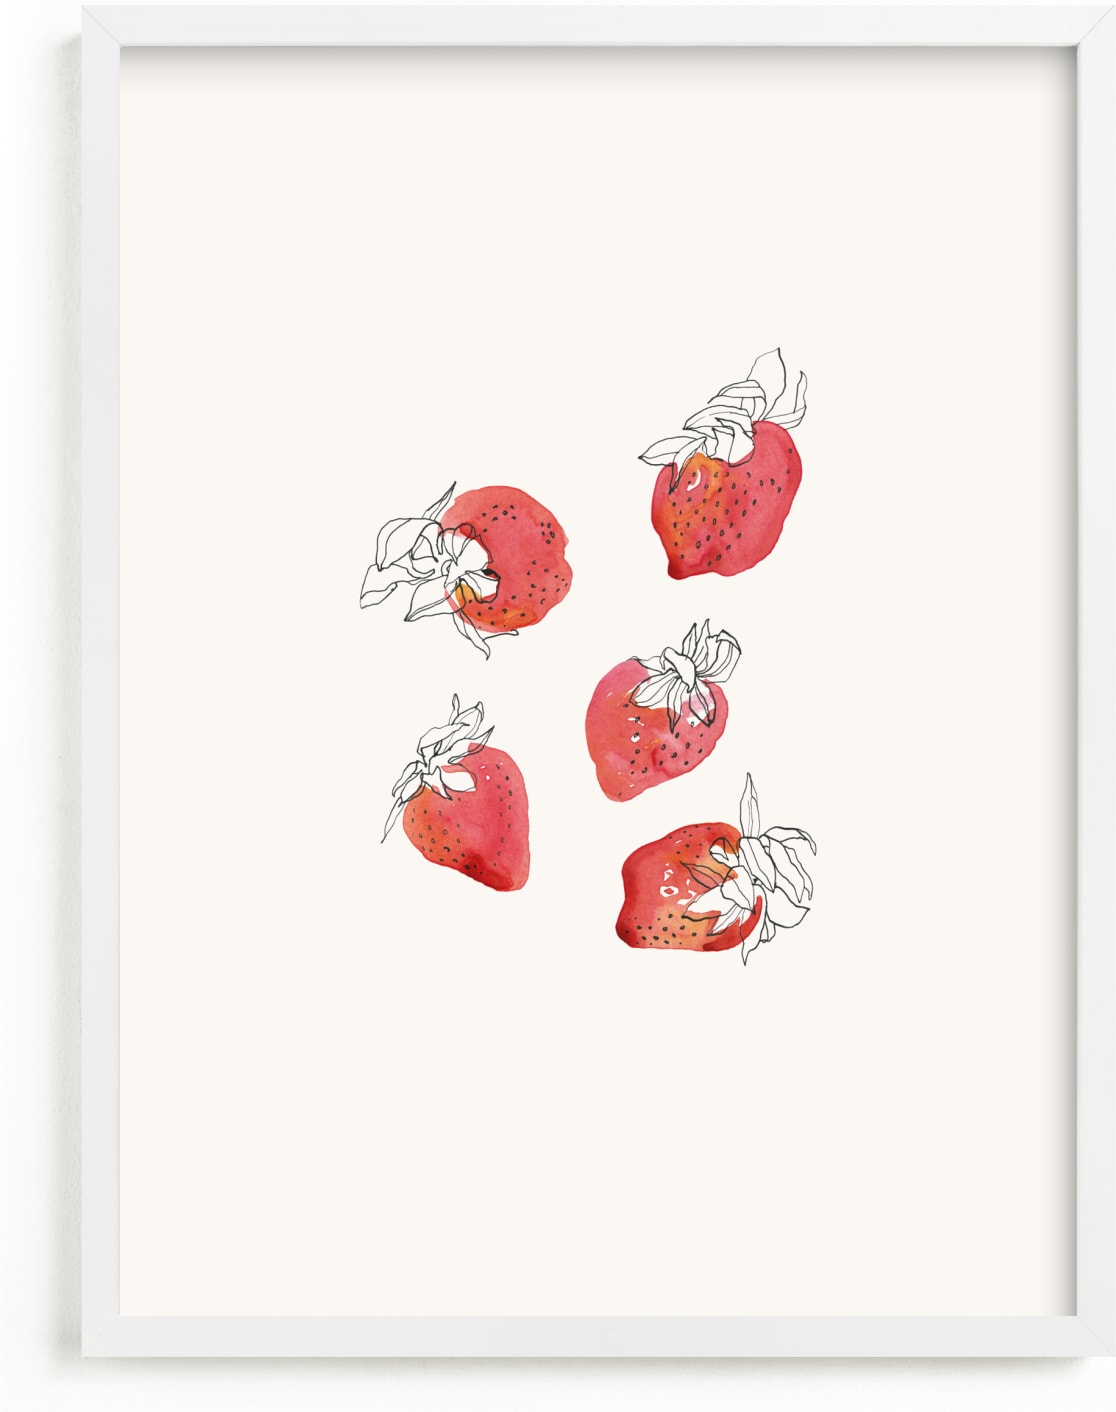 This is a ivory art by Catilustre called Strawberries.